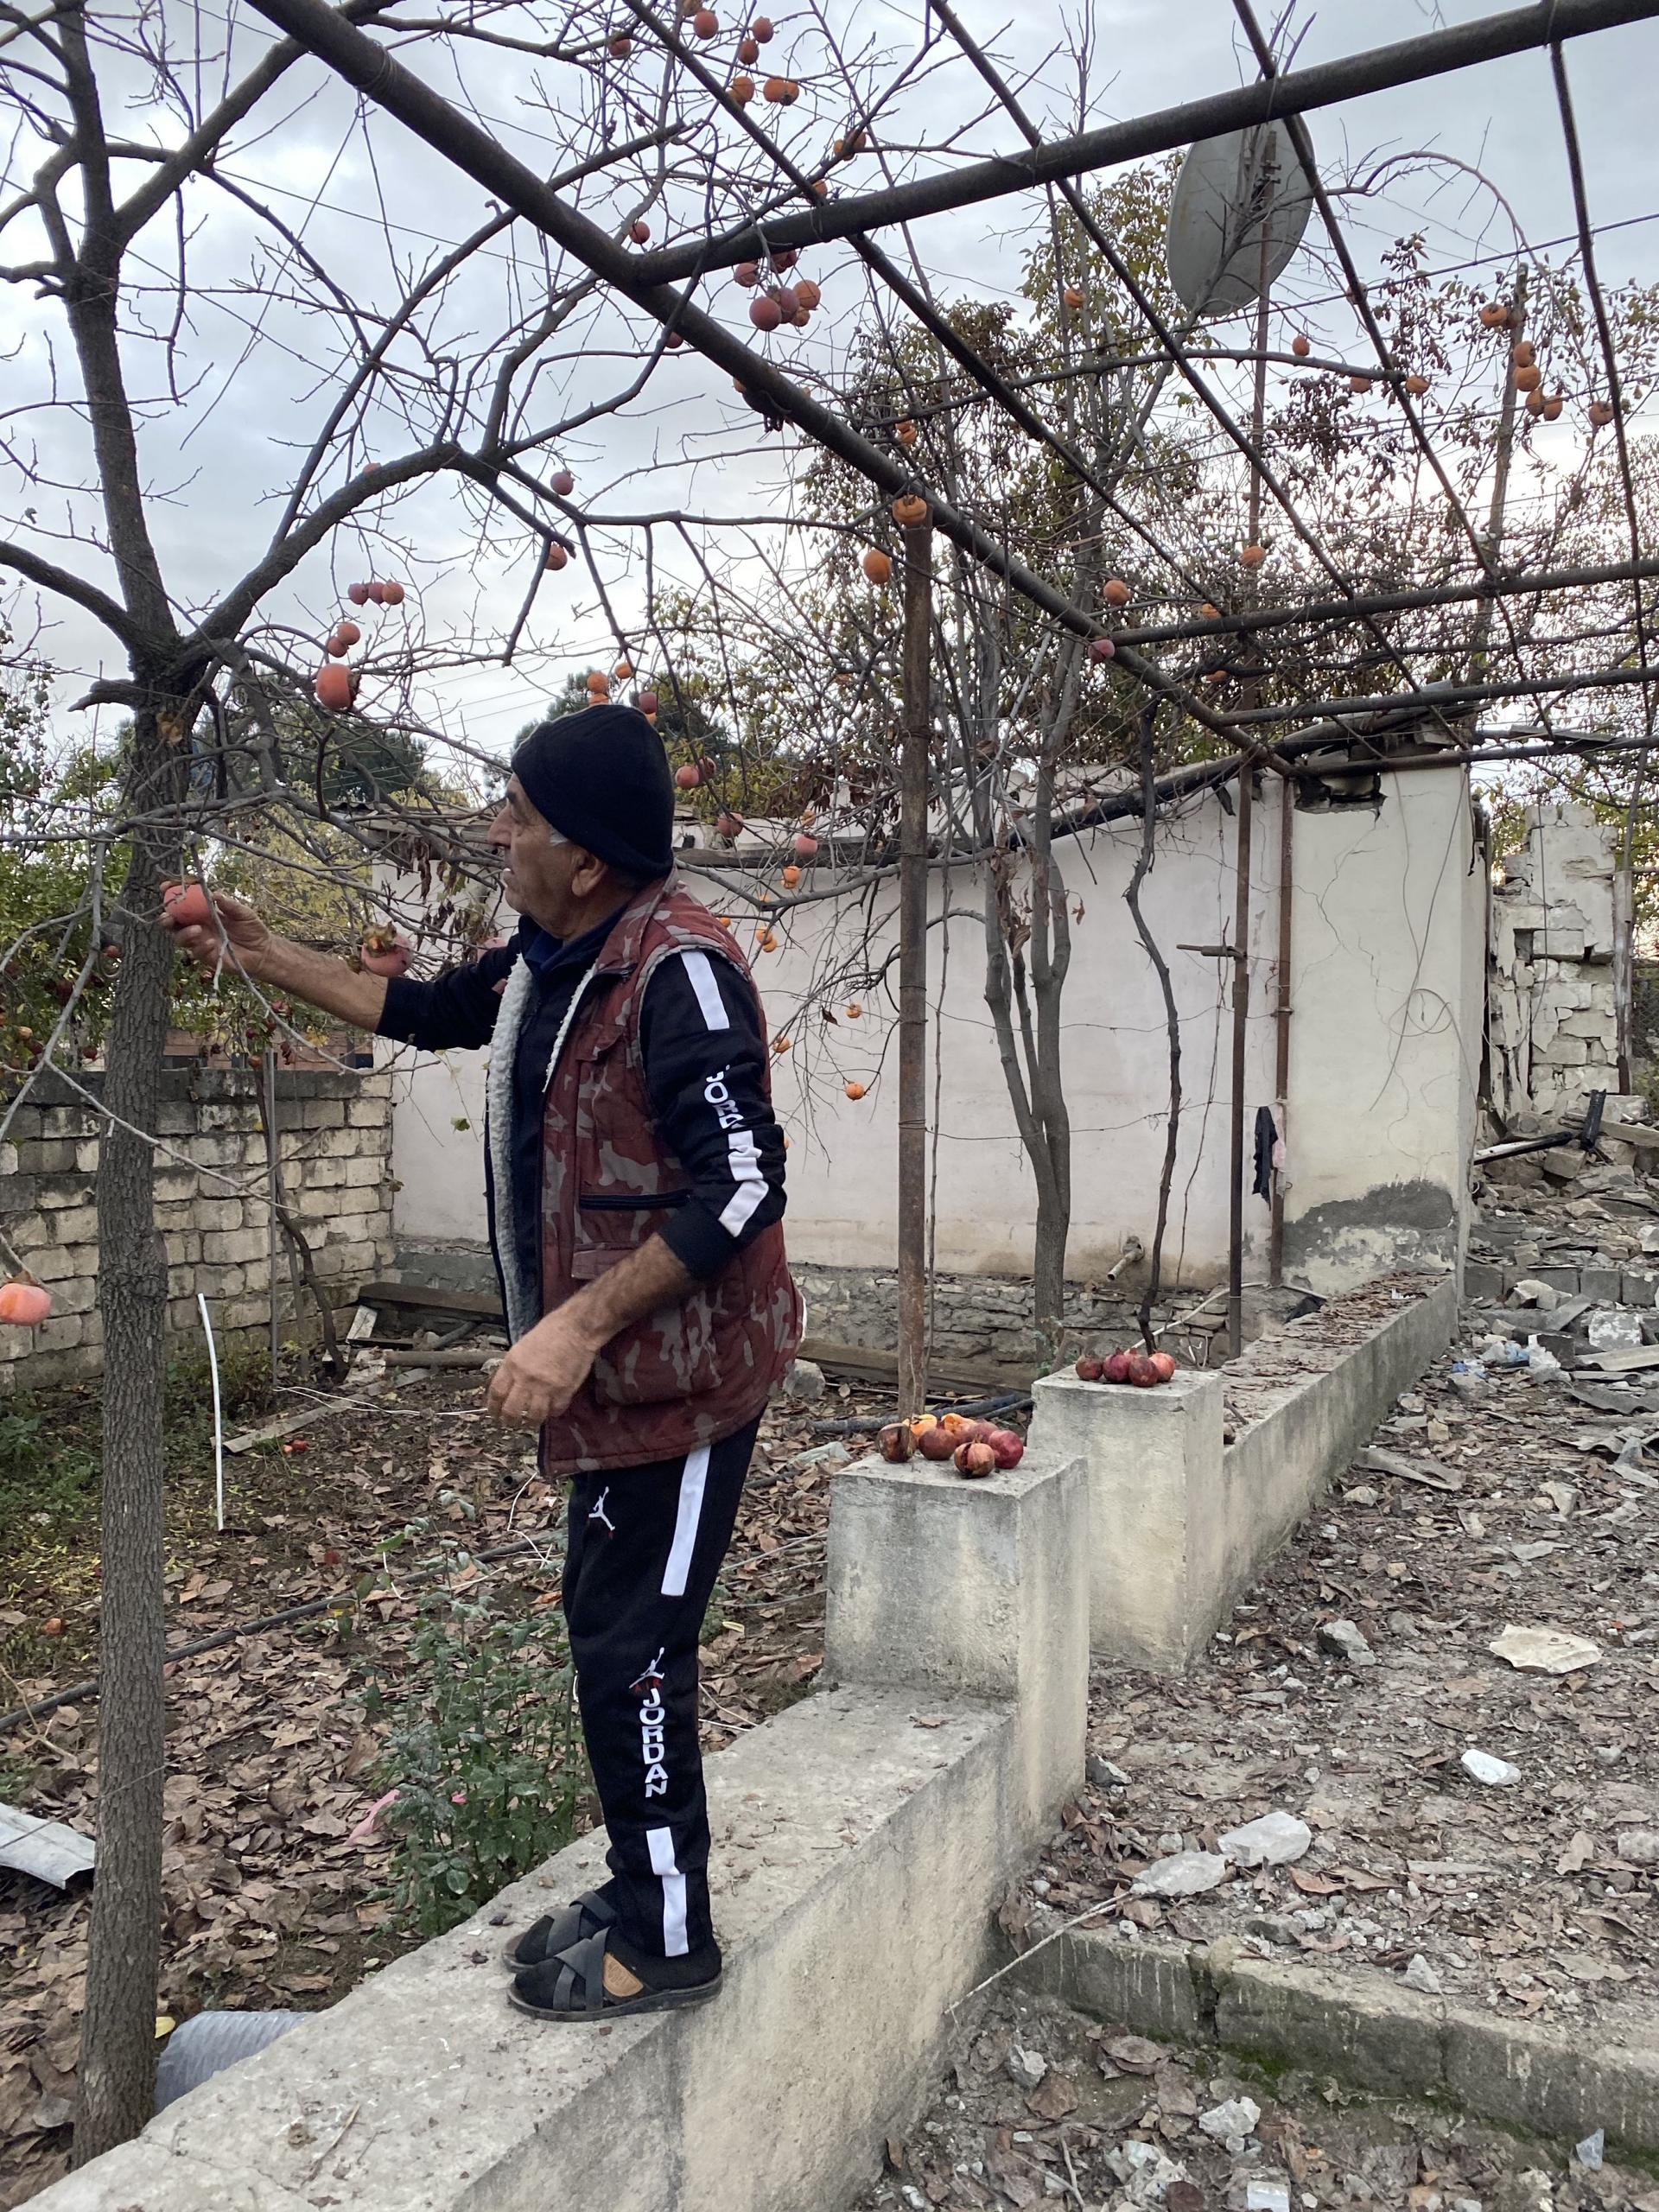 Levitan Danielyan, 68, picks some persimmons from his garden in the Armenian town Martuni around the wreckage from a nearby shelling.